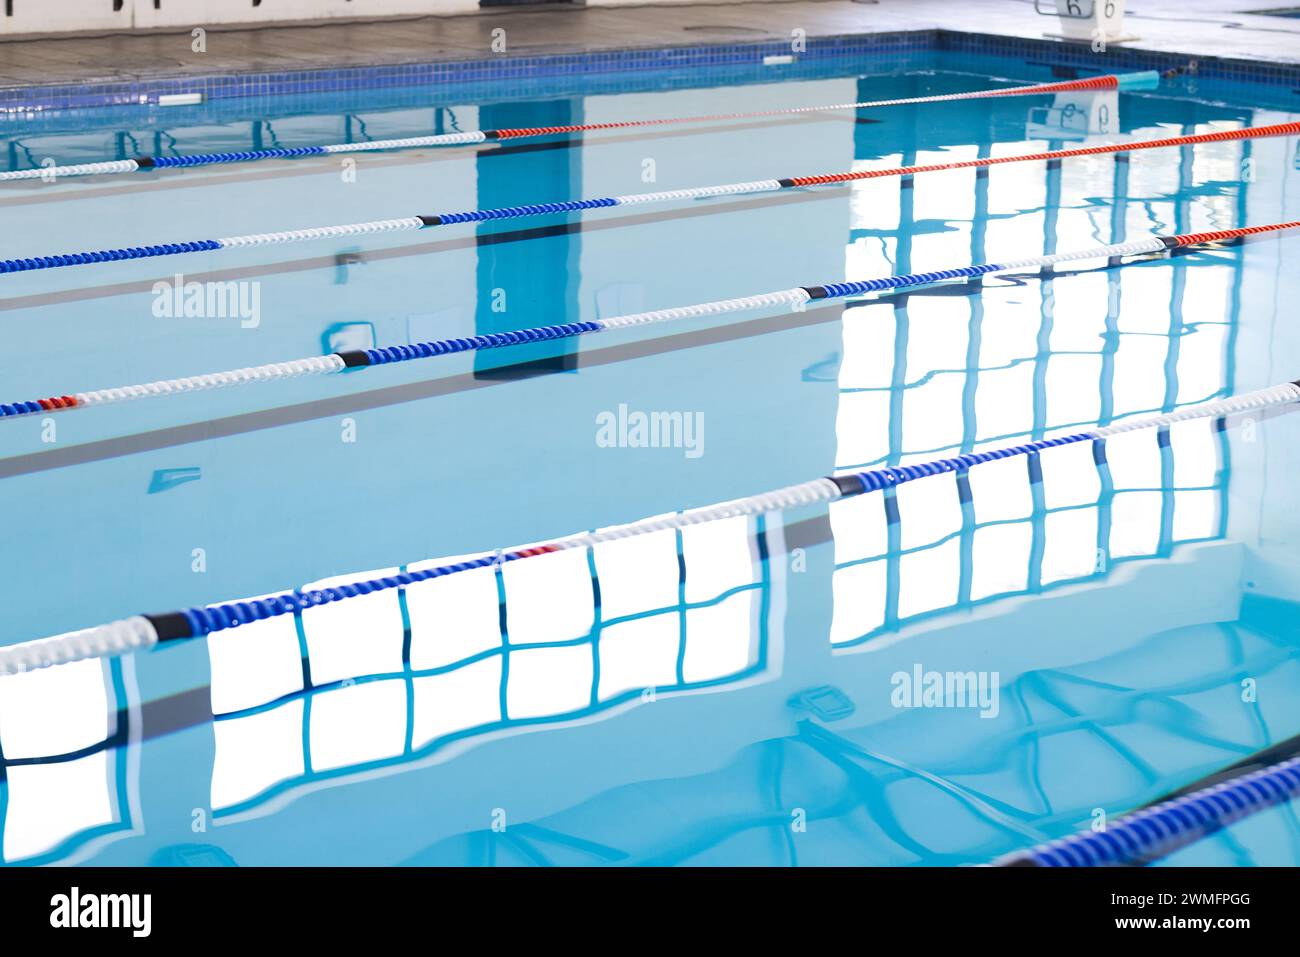 Empty lanes in a serene indoor swimming pool await swimmers Stock Photo